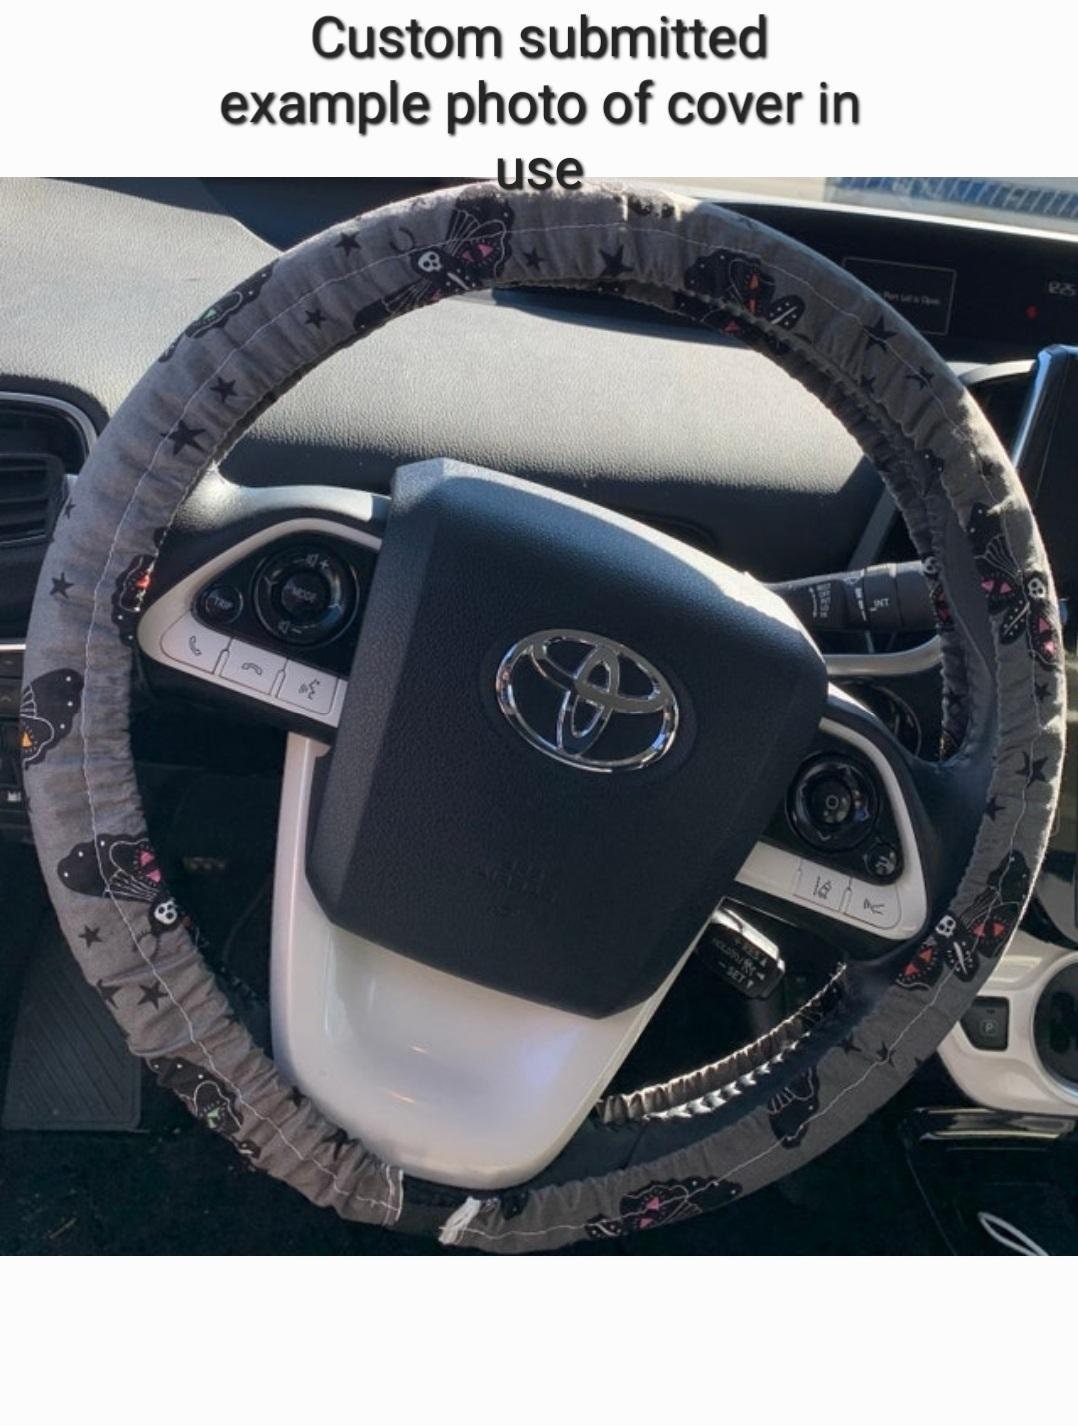 Vibrant Sugar Skull Steering Wheel Cover - Harlow's Store and Garden Gifts